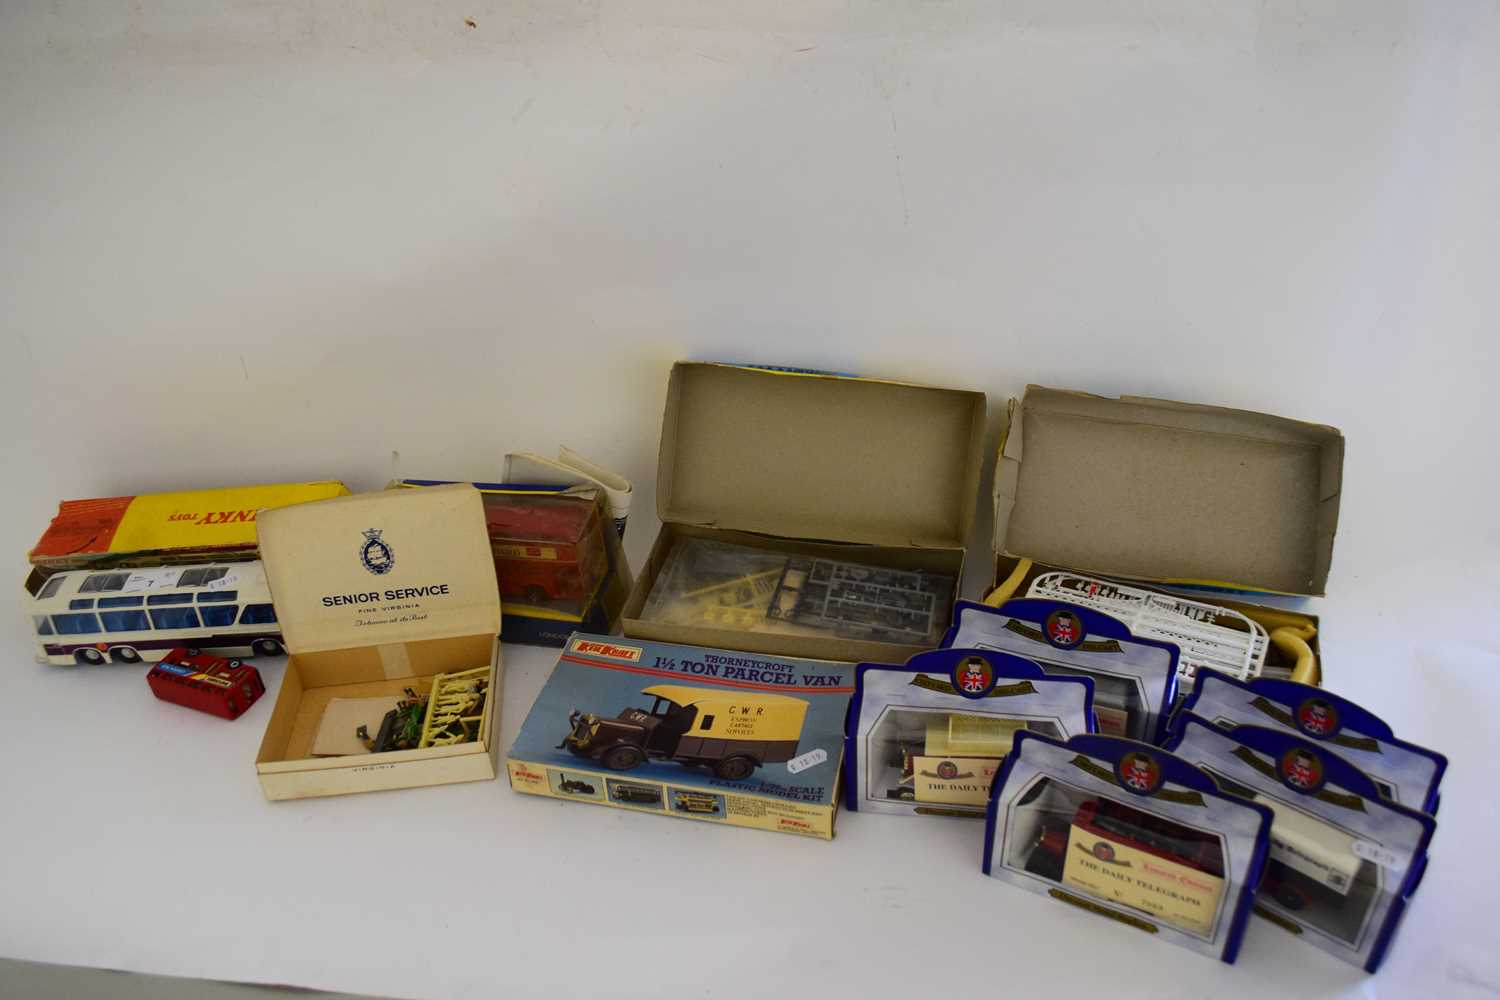 VARIOUS TOY BUSES TO INCLUDE DINKY SUPERTOYS PLUS BOXED AIRFIX KITS